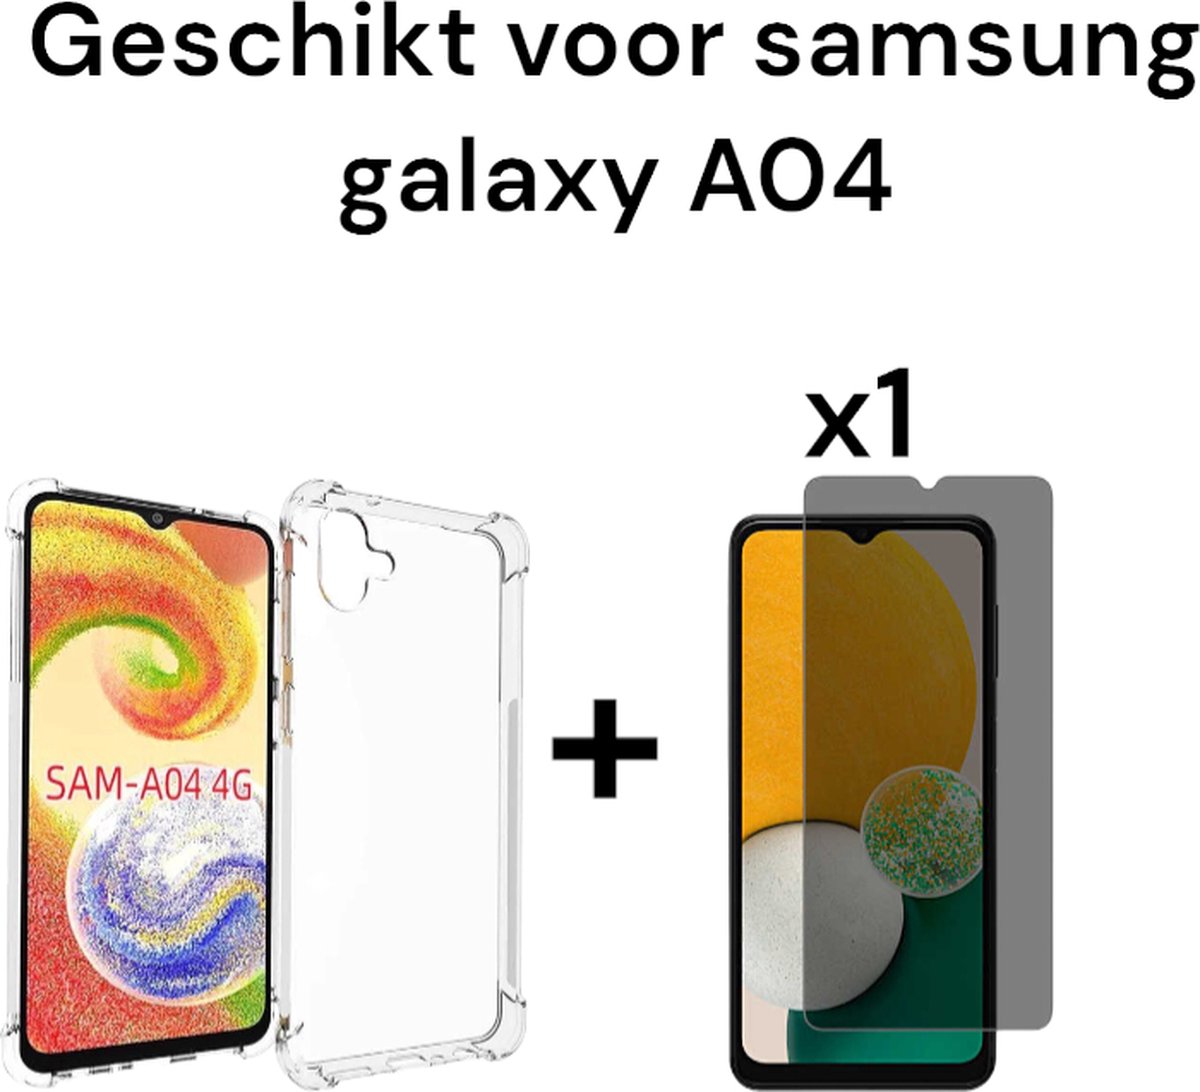 samsung galaxy a04 hoesje siliconen transparant antishock achterkant +1x privacy screen protectorsamsung galaxy a04s hoesje siliconen schock proof doorzichtig back cover +1x privacy tempered glass